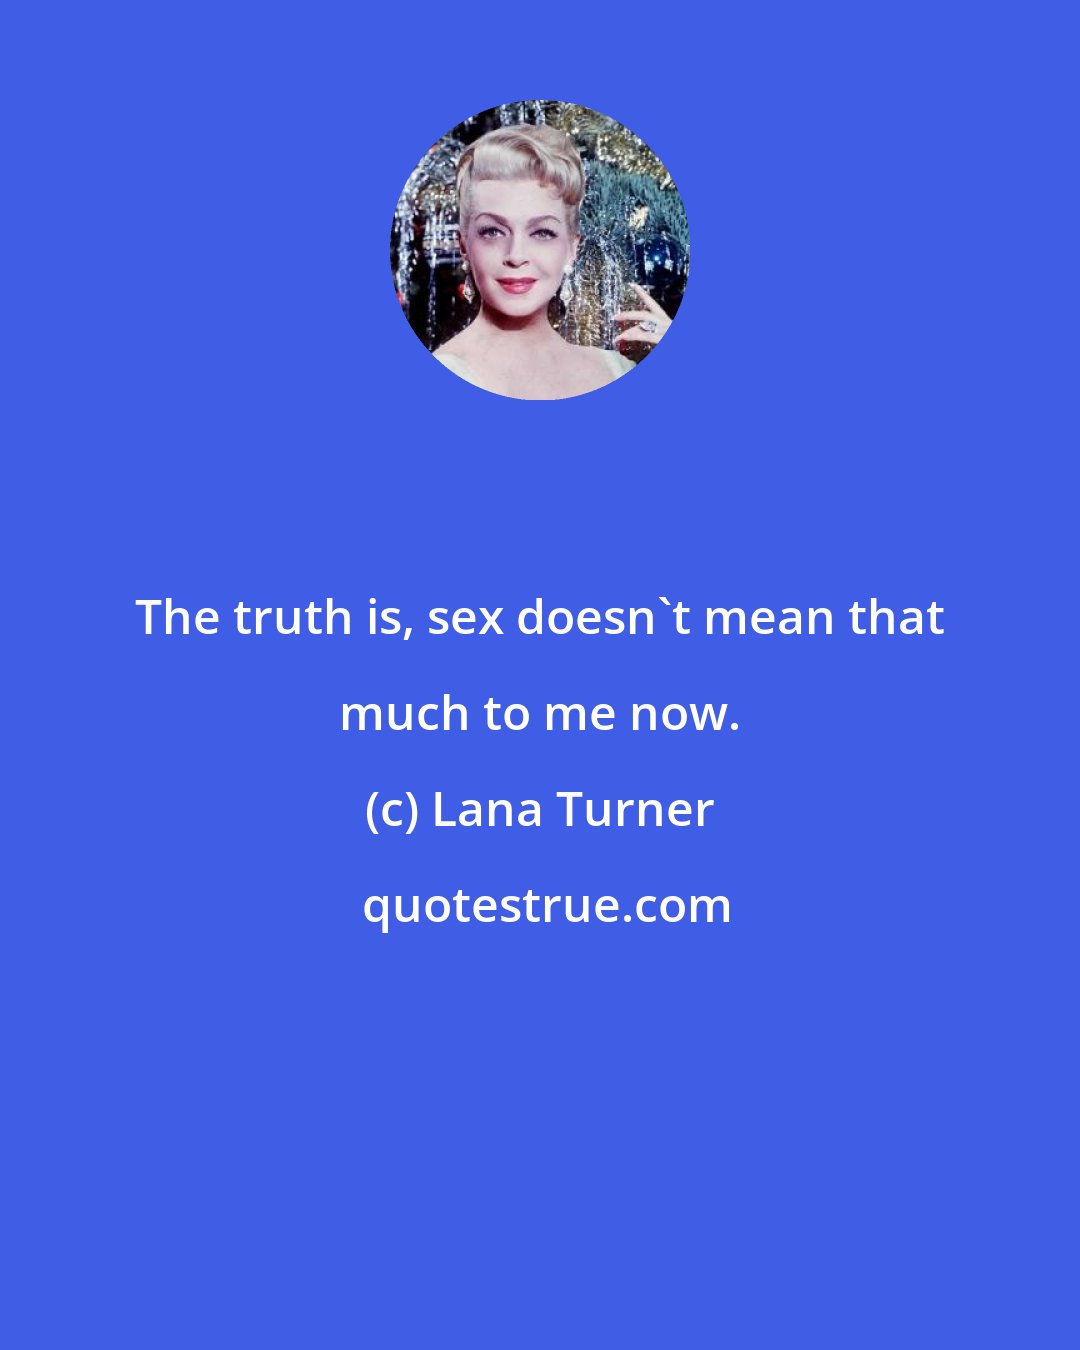 Lana Turner: The truth is, sex doesn't mean that much to me now.